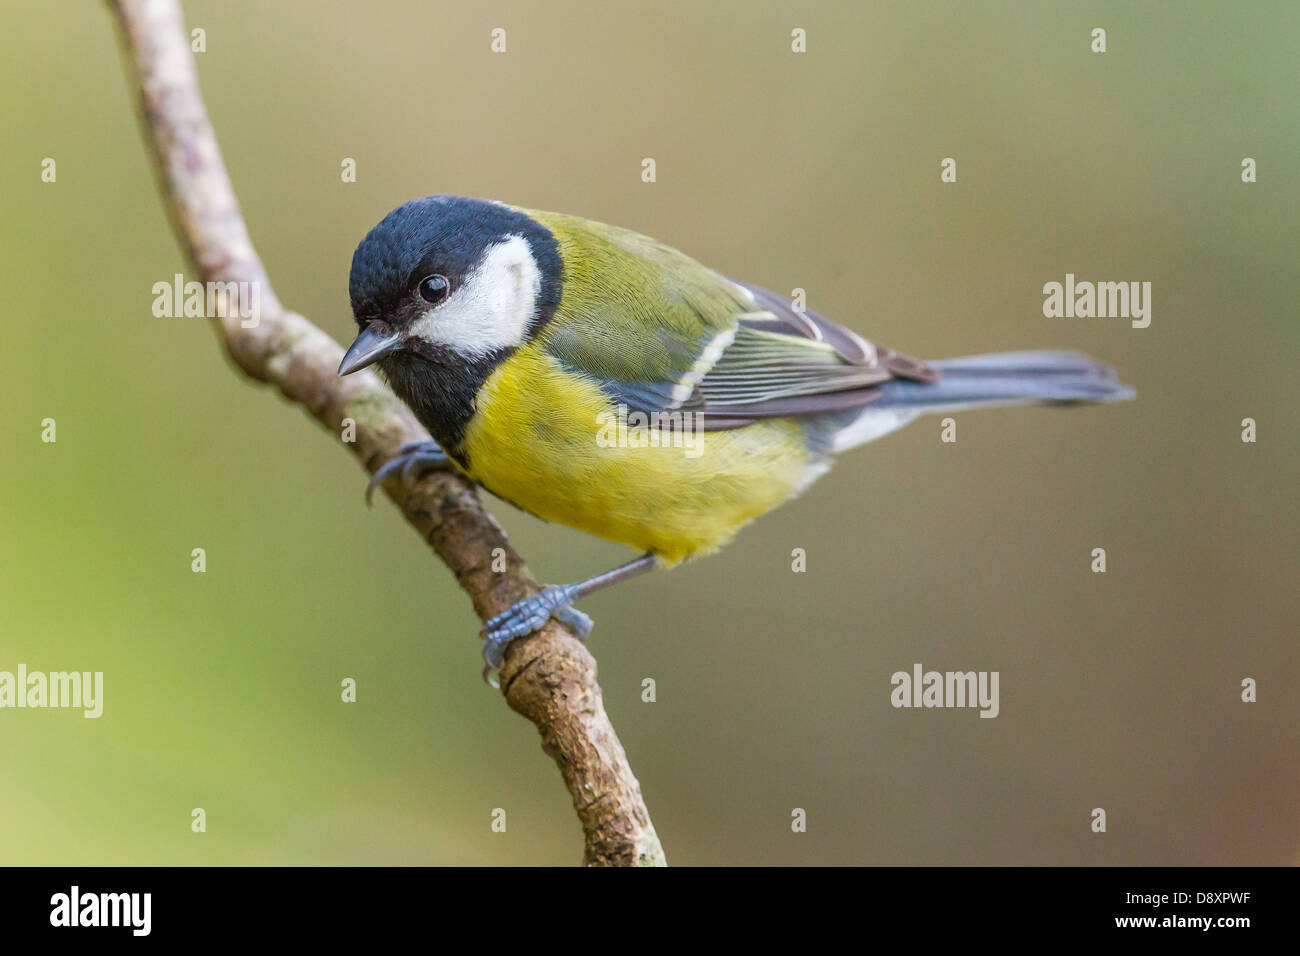 Great Tit, Parus major on a branch. Shallow depth of field and bakground blurred Stock Photo